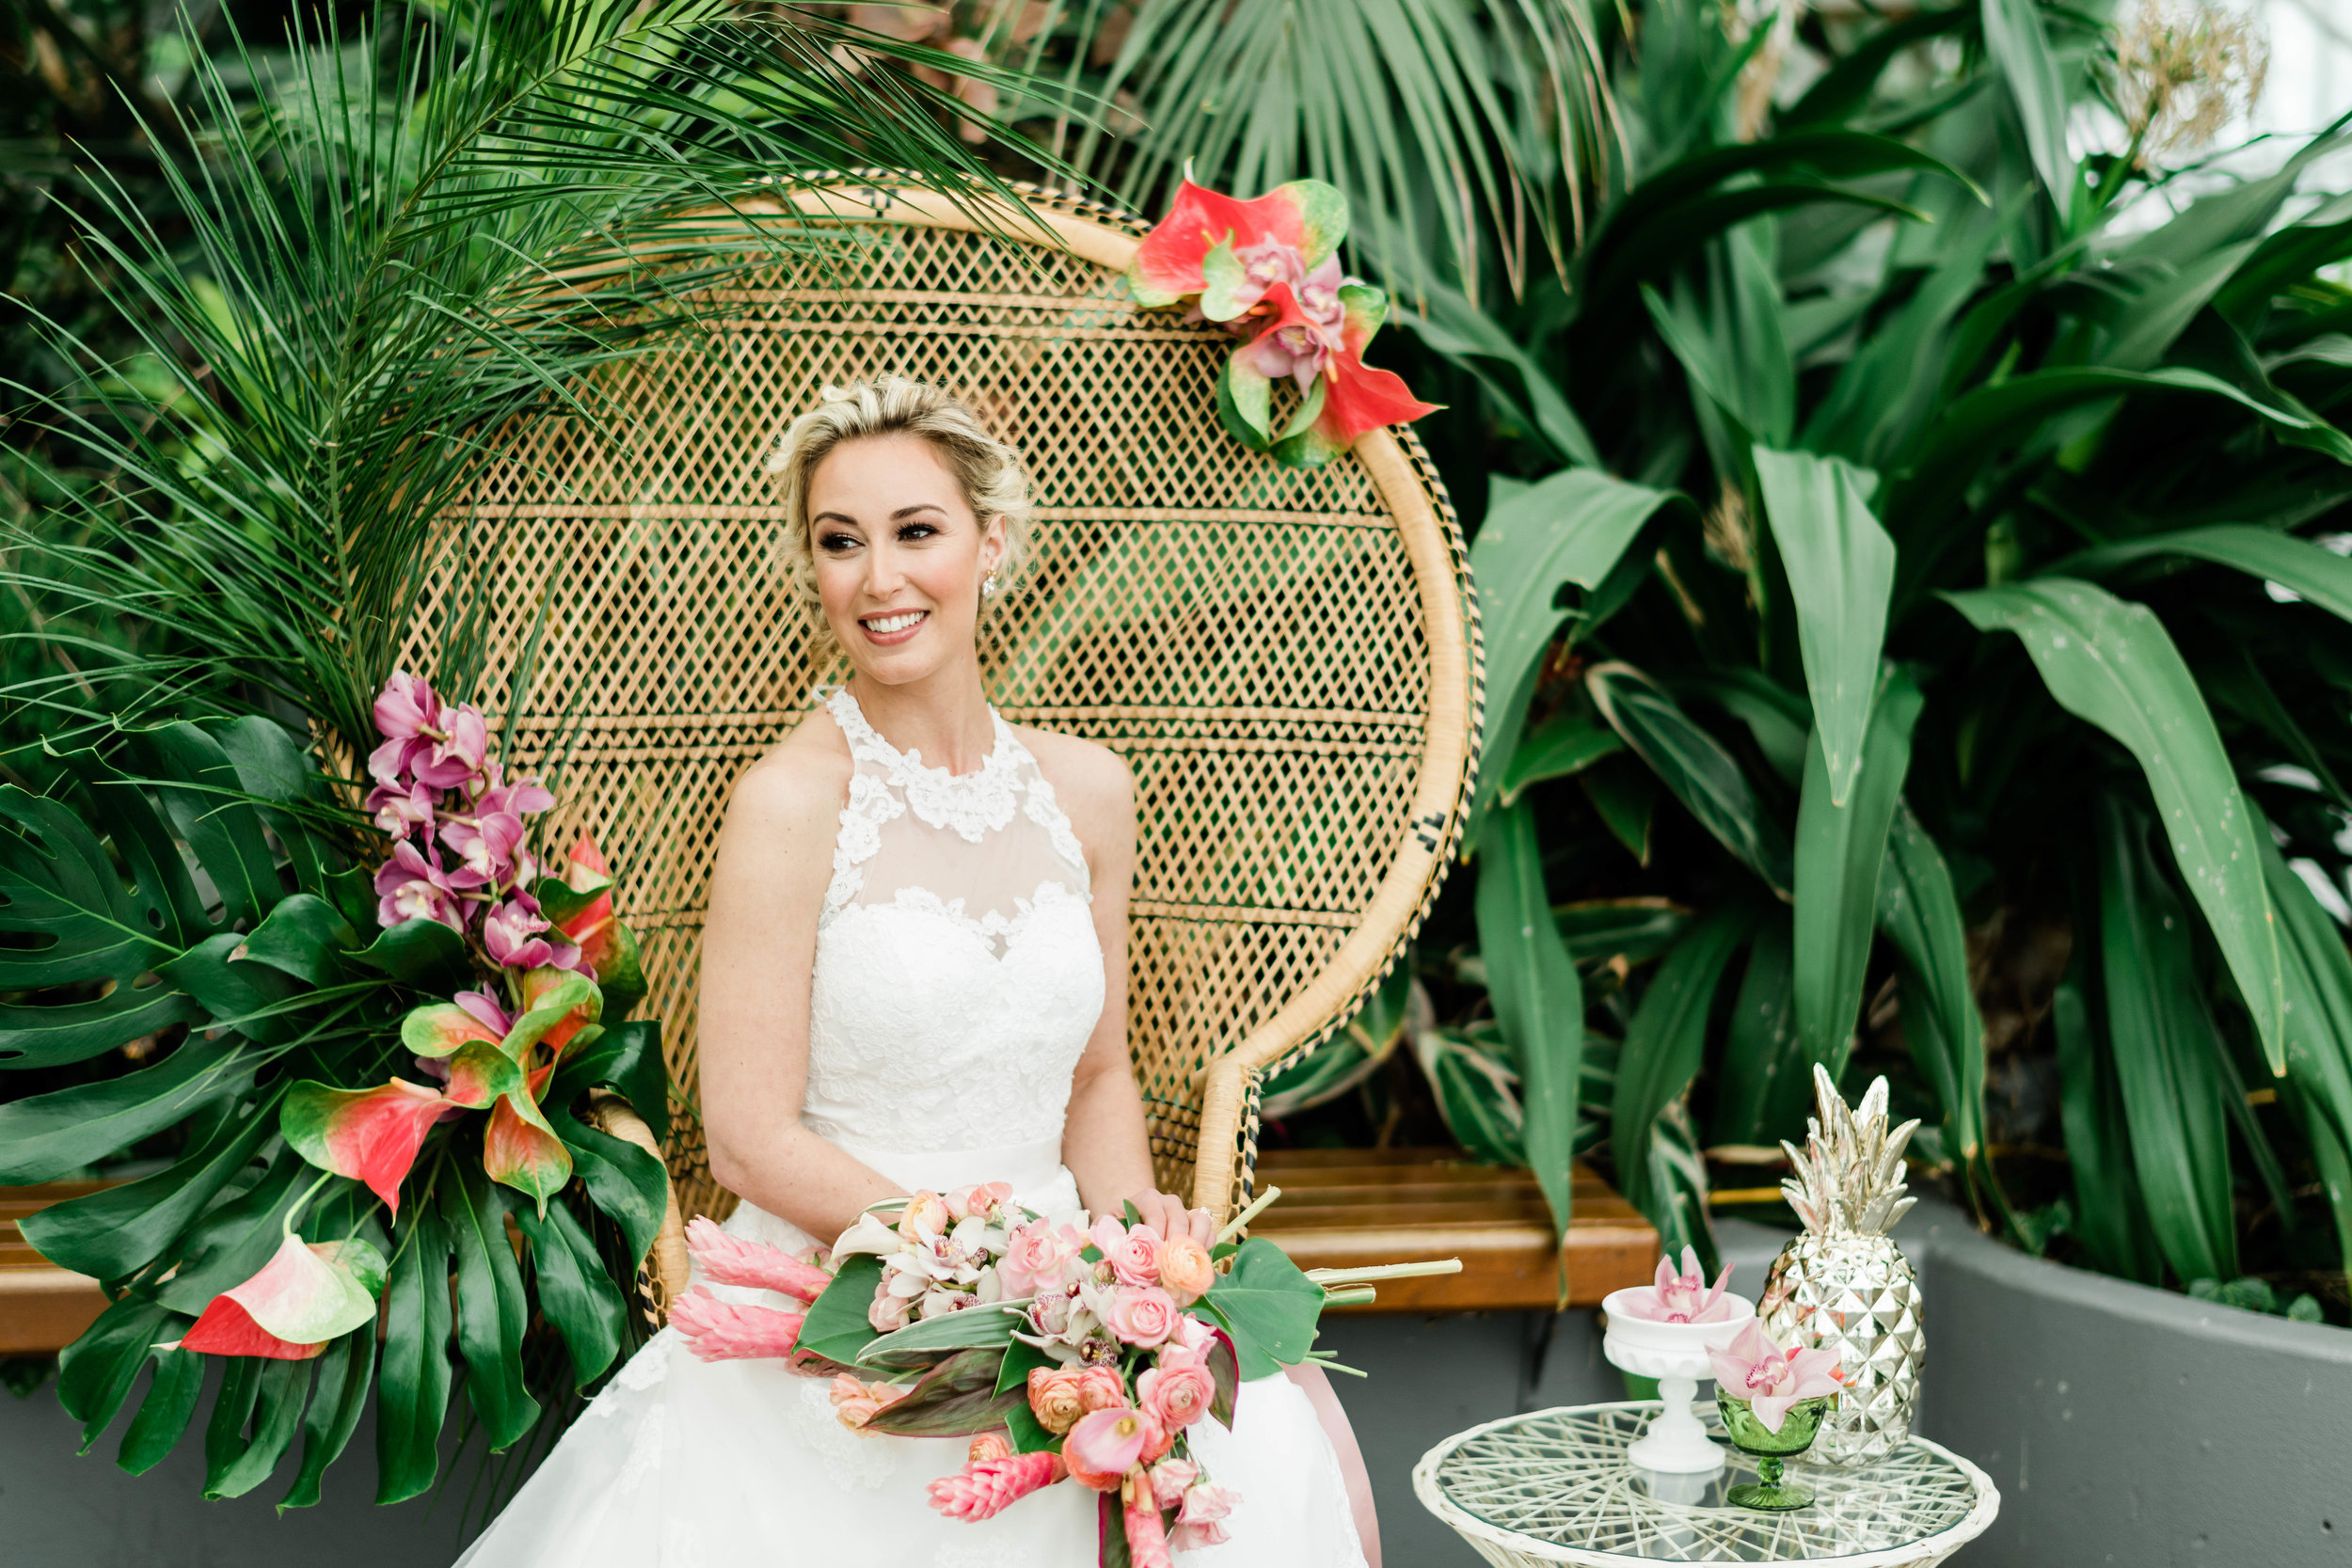 Bride sitting in peacock chair